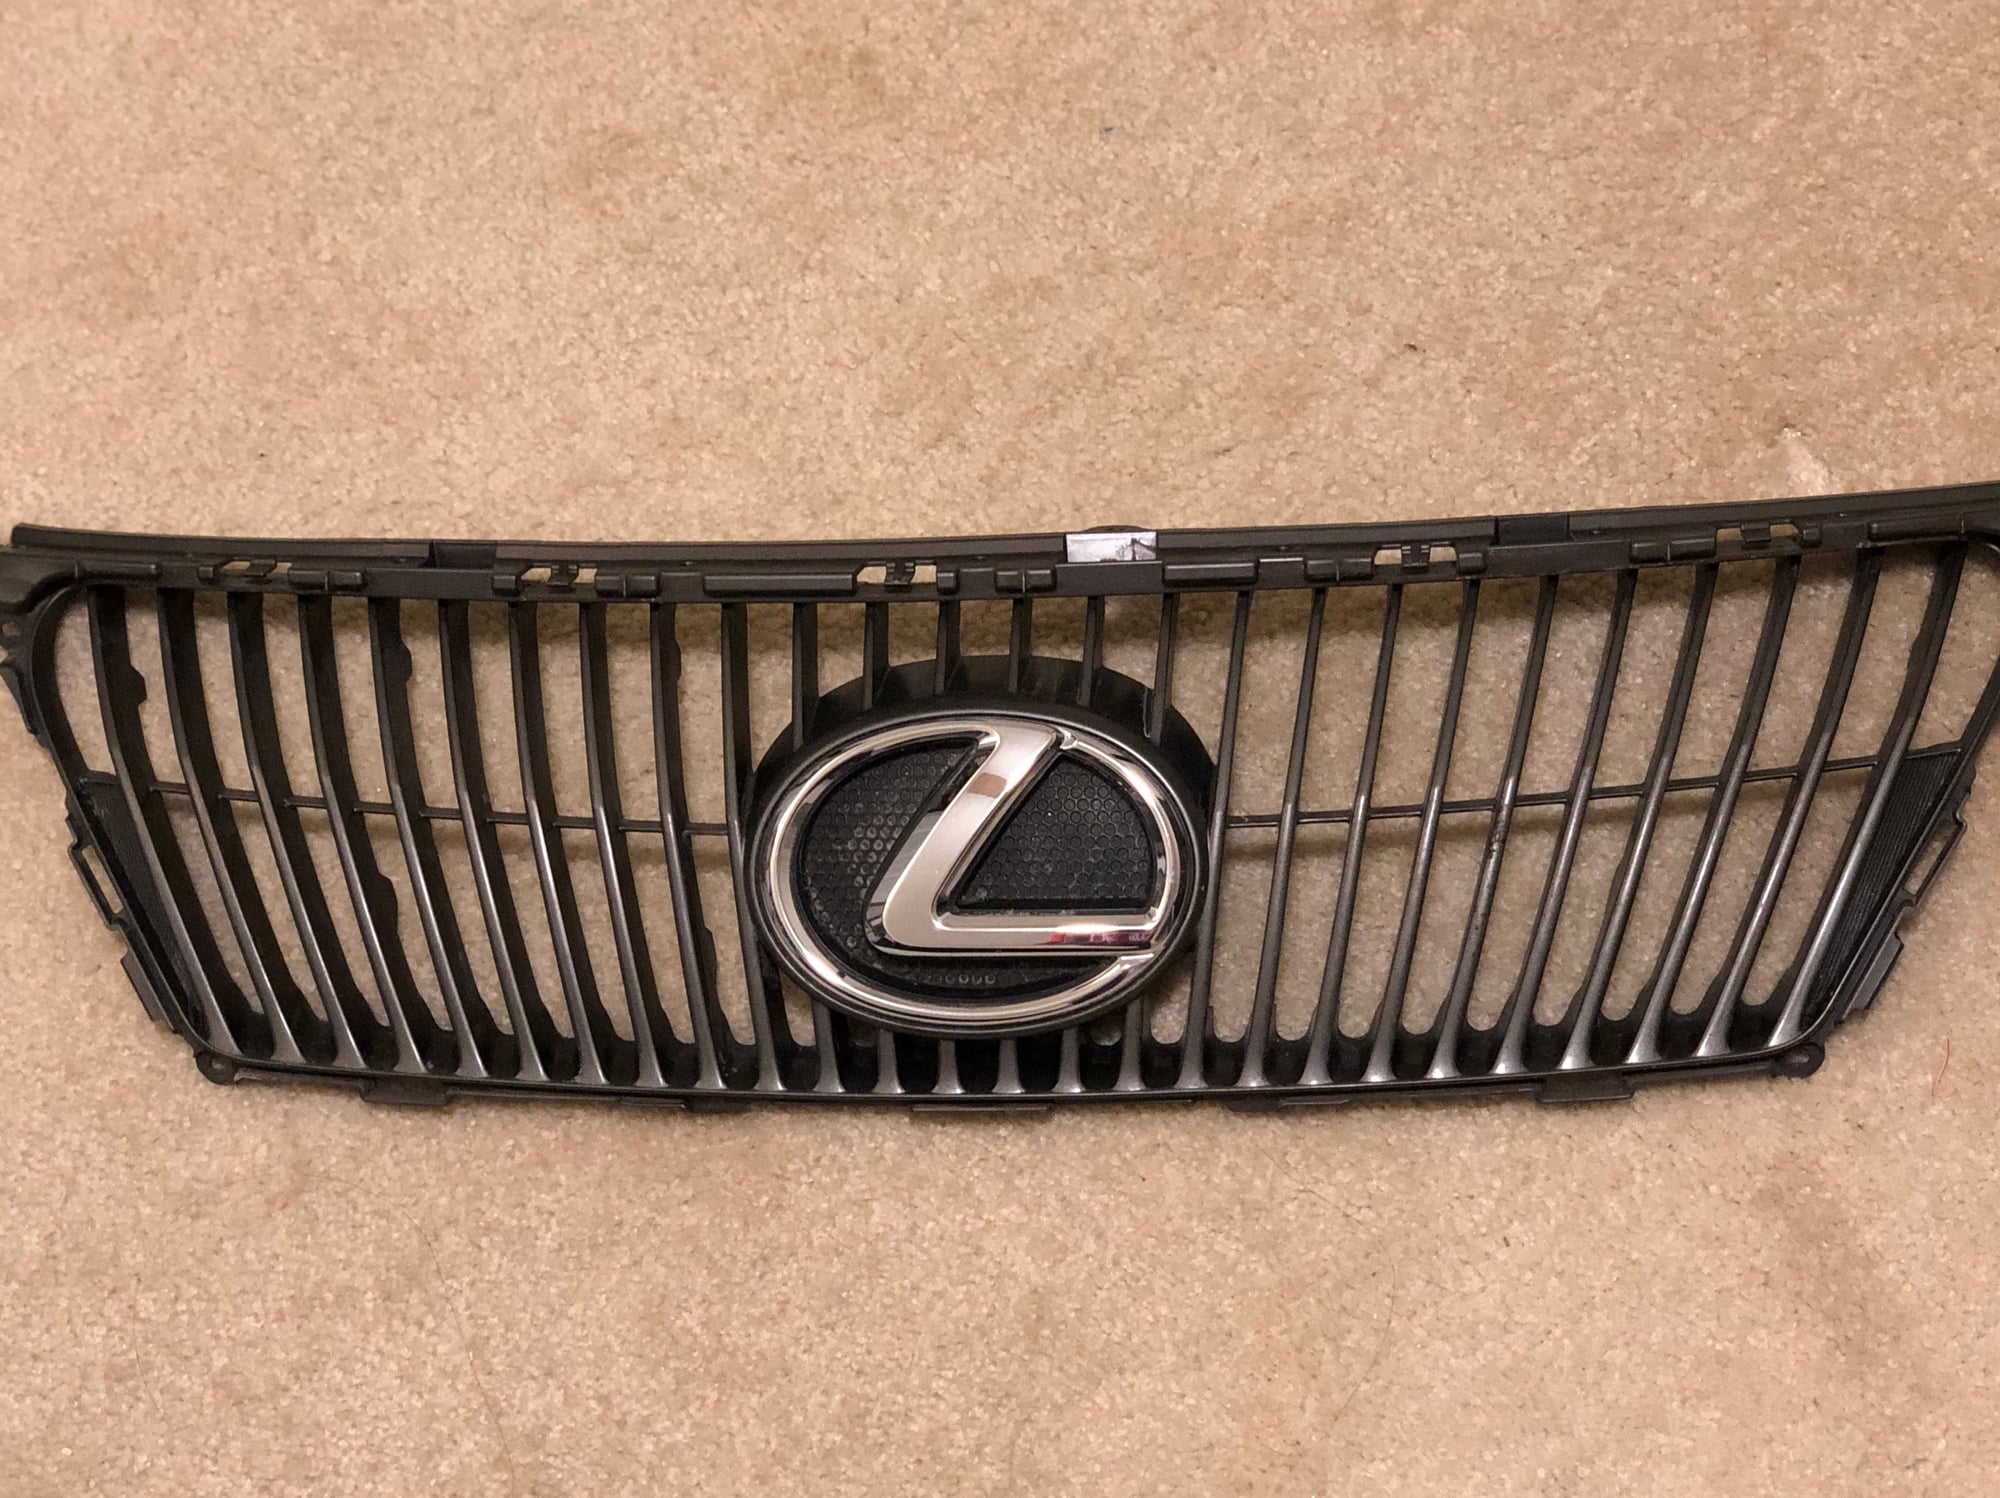 Accessories - 2IS ('10-'13) Upper and Lower Grille & Grimmspeed Plate Relocator - Used - 2010 to 2013 Lexus IS350 - 2010 to 2013 Lexus IS250 - 2010 to 2013 Lexus IS F - Bristow, VA 20136, United States